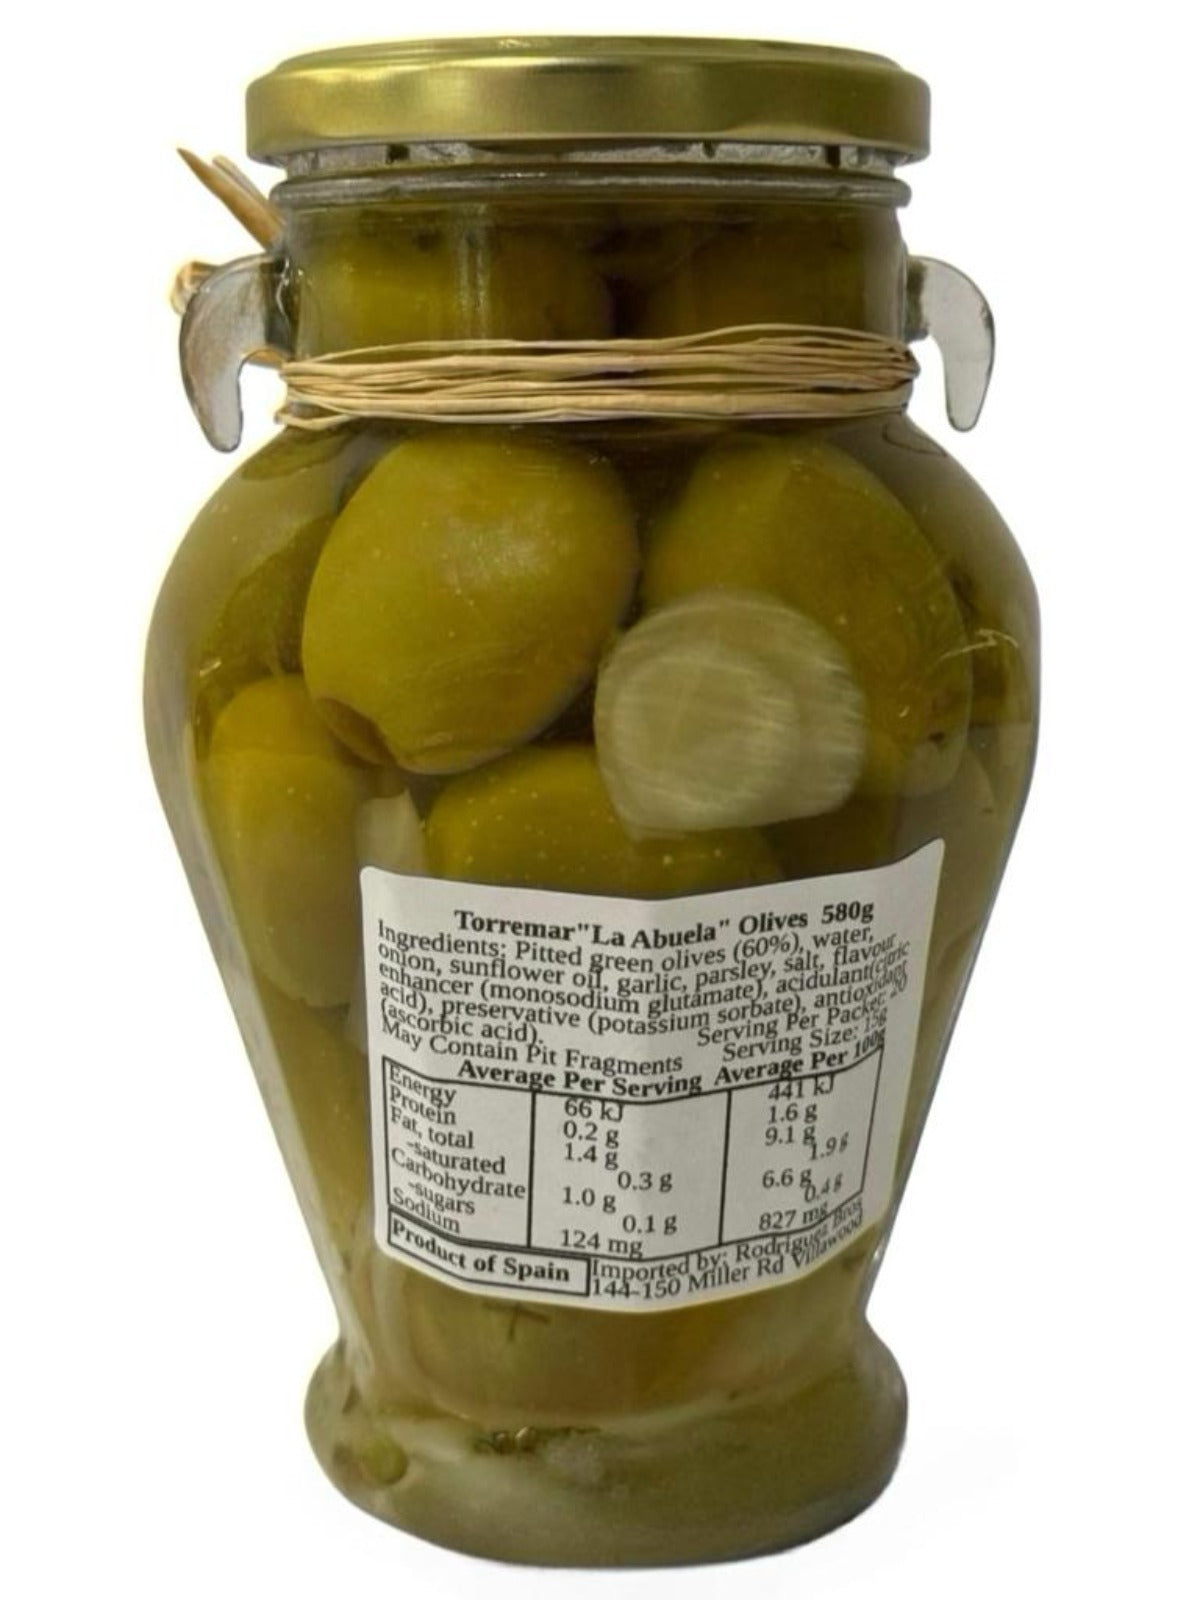 Torremar Spanish Pitted Queen Olives La Abuela Recipe 580g Best Before April 2027